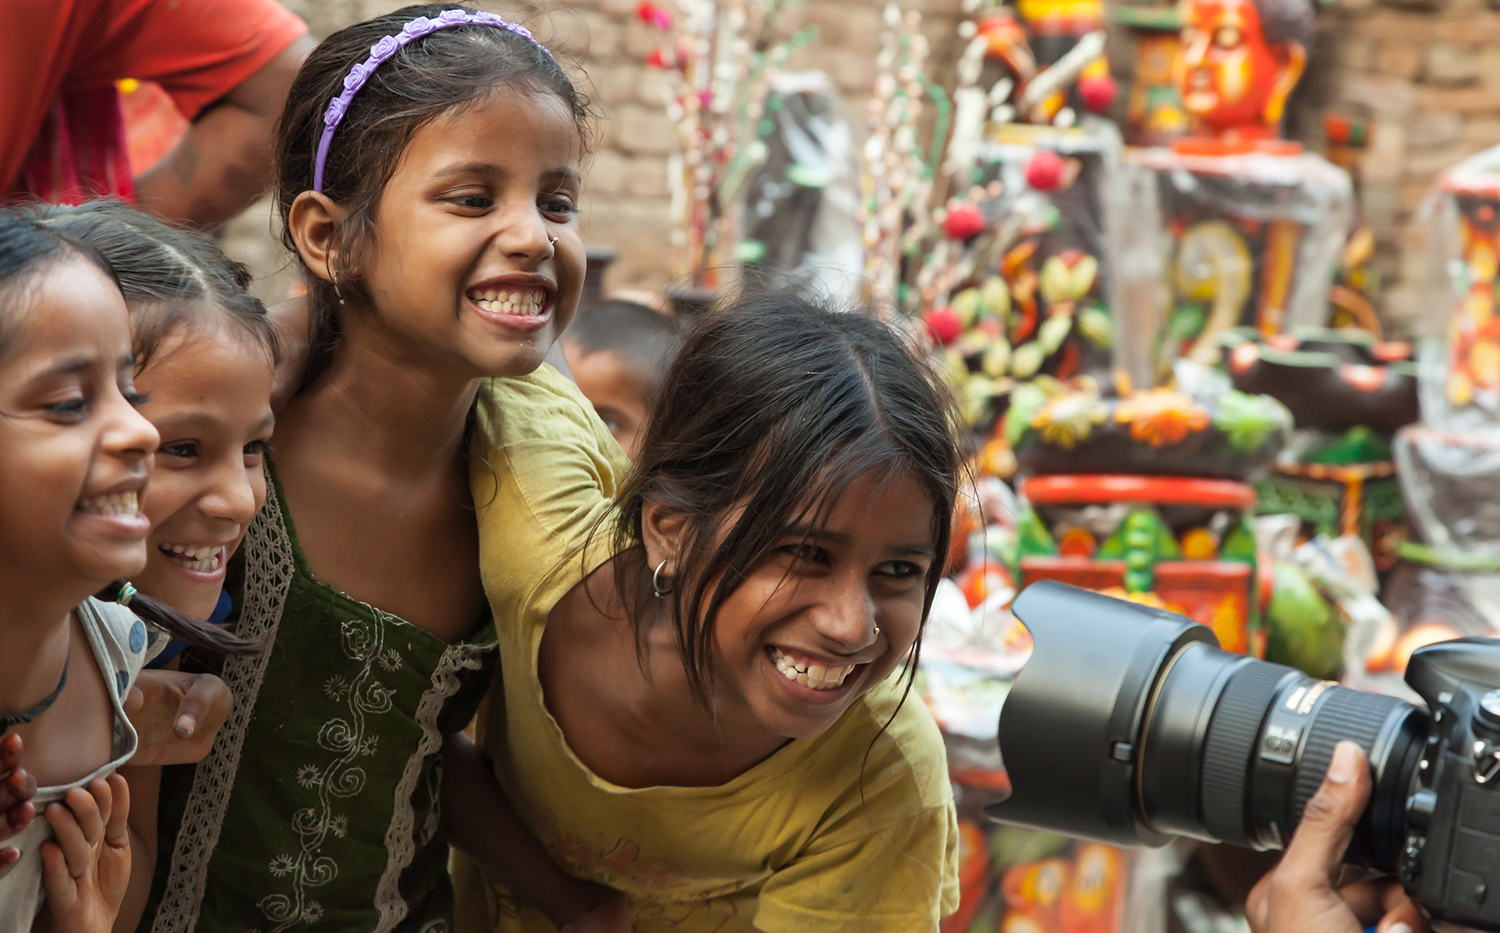 Happy East Indian girls pose for photographer on city street.